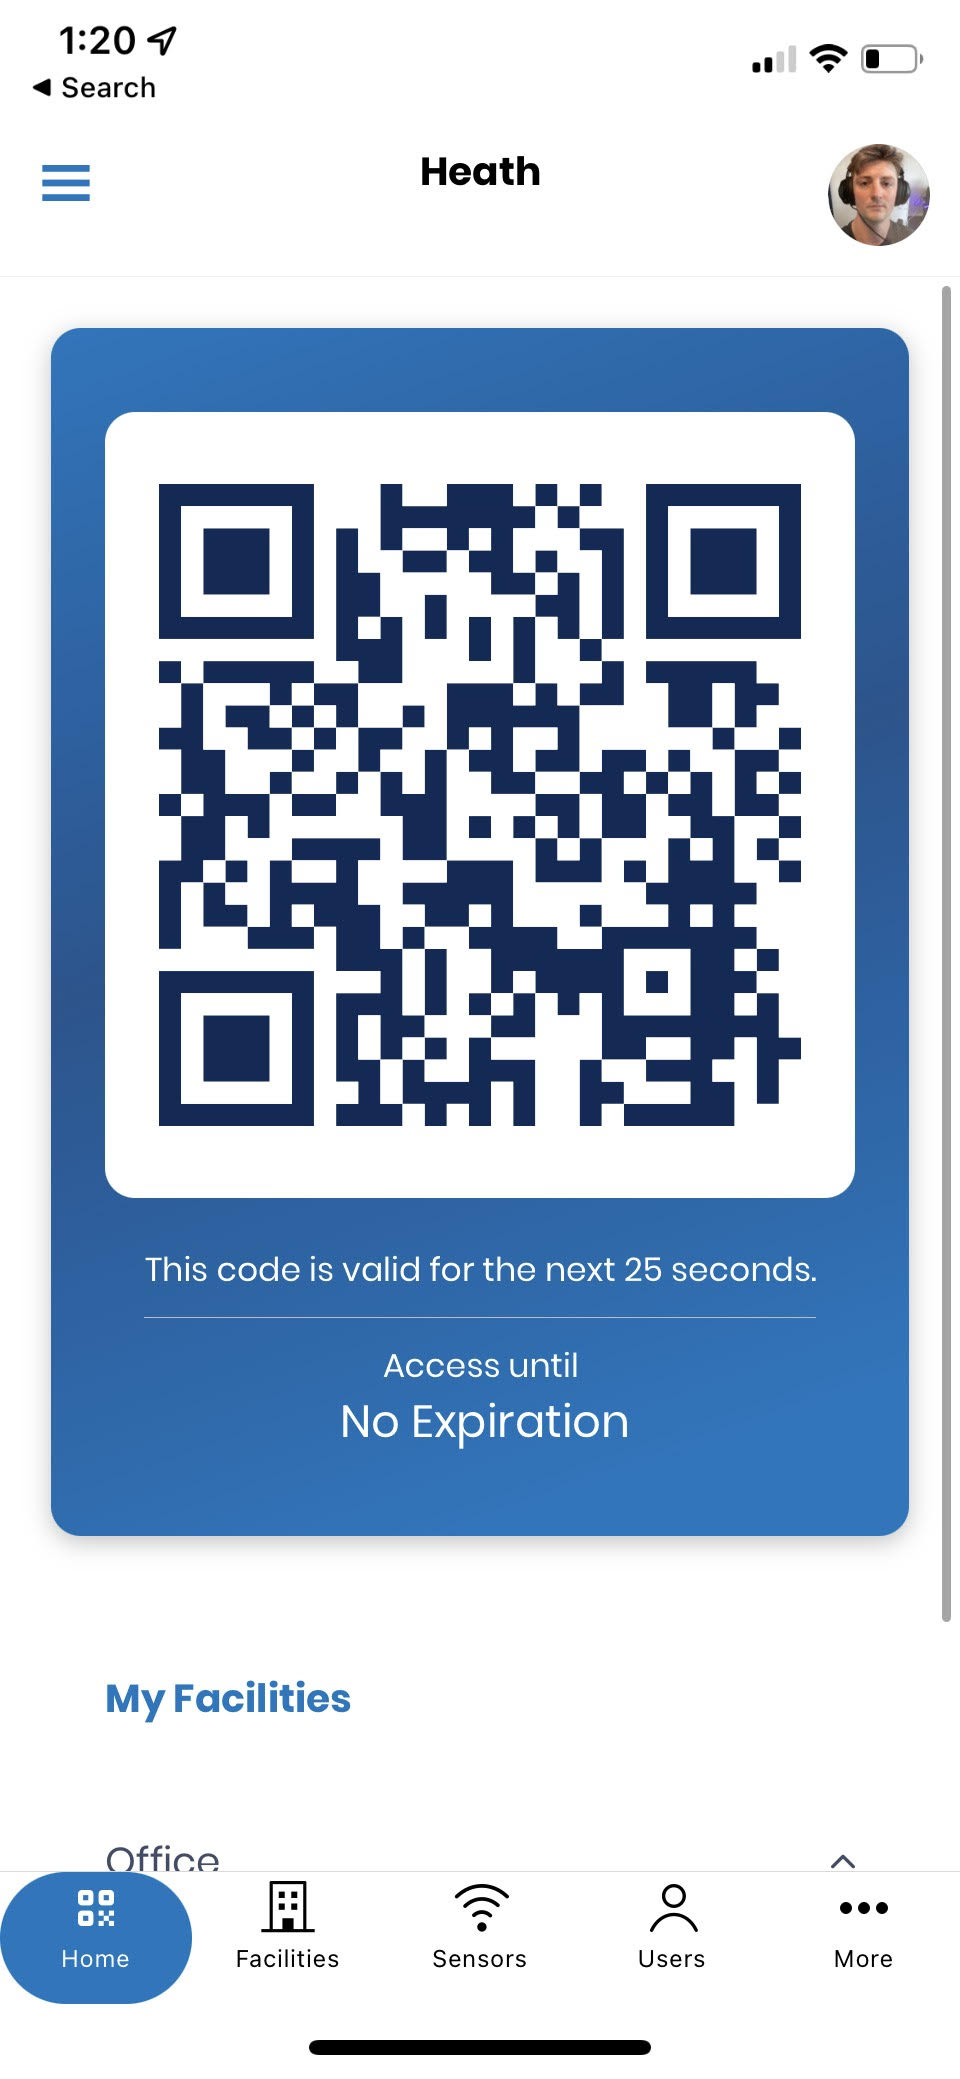 IOS Screenshot - Home Tab Mobile Credential: A user must present the QR code to the door sensor to gain admission to the access point using single-factor access. When using multi-factor access, the user must next present their face to be granted access.